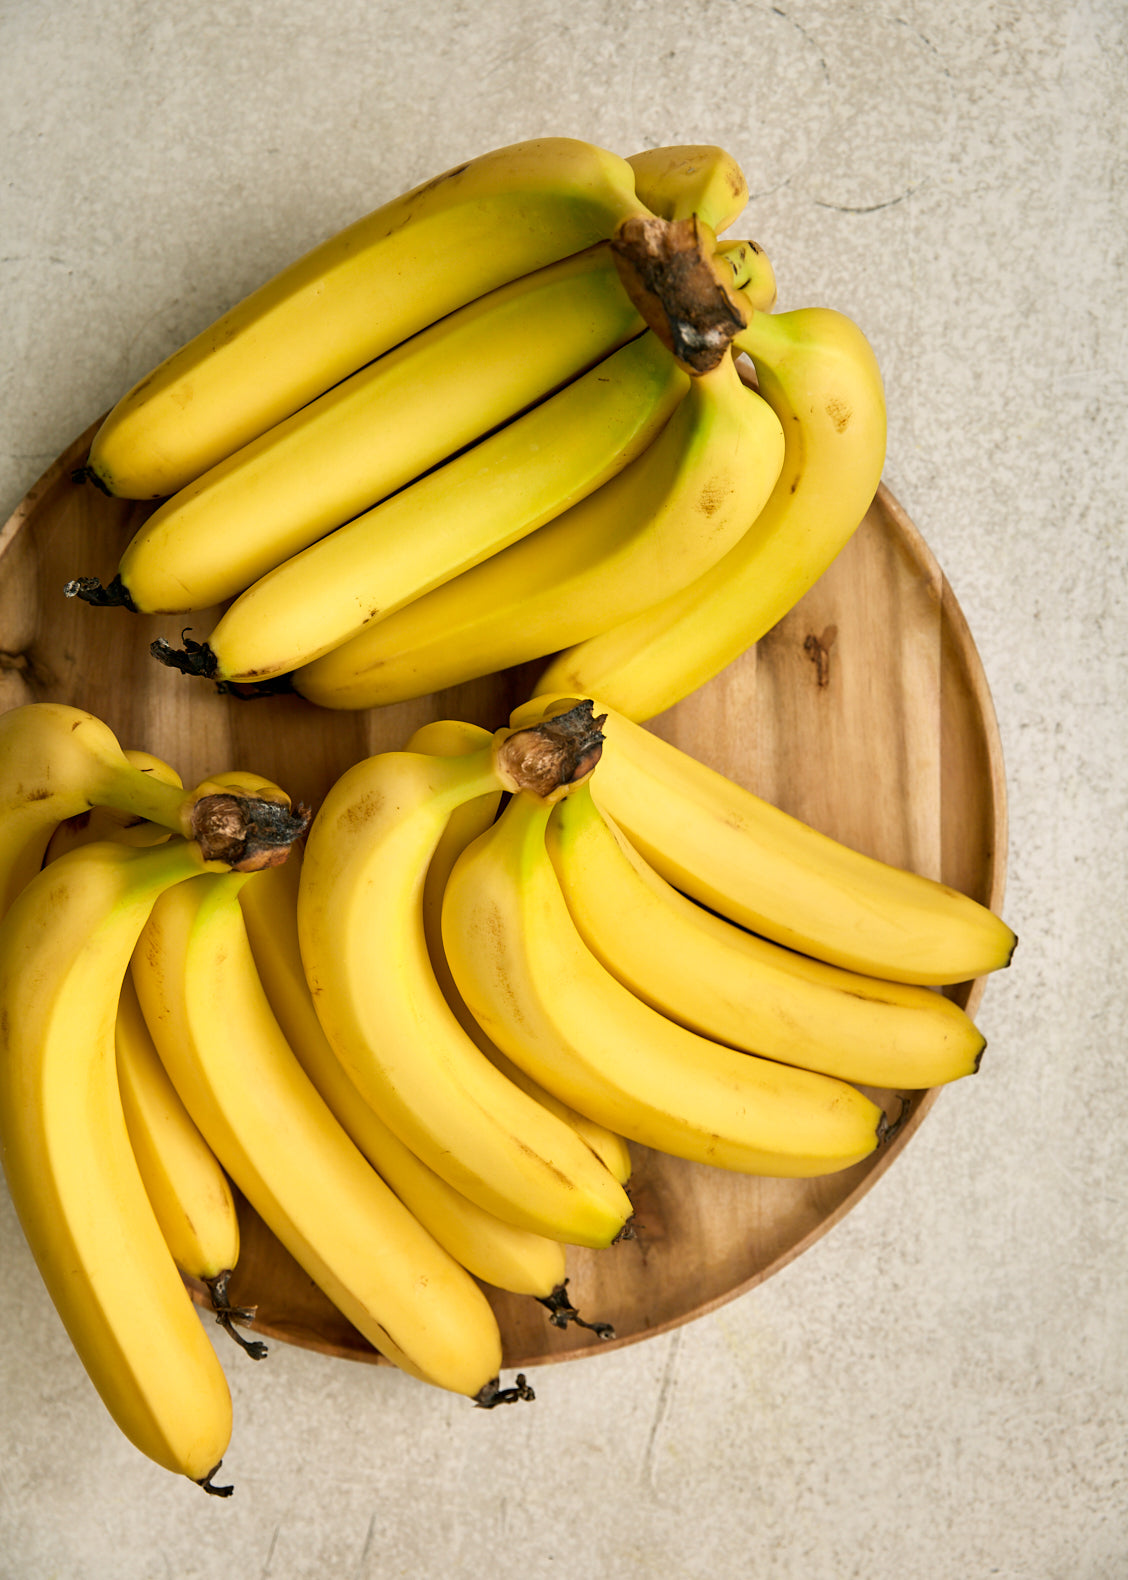 3 bunches of yellow bananas on a wooden platter